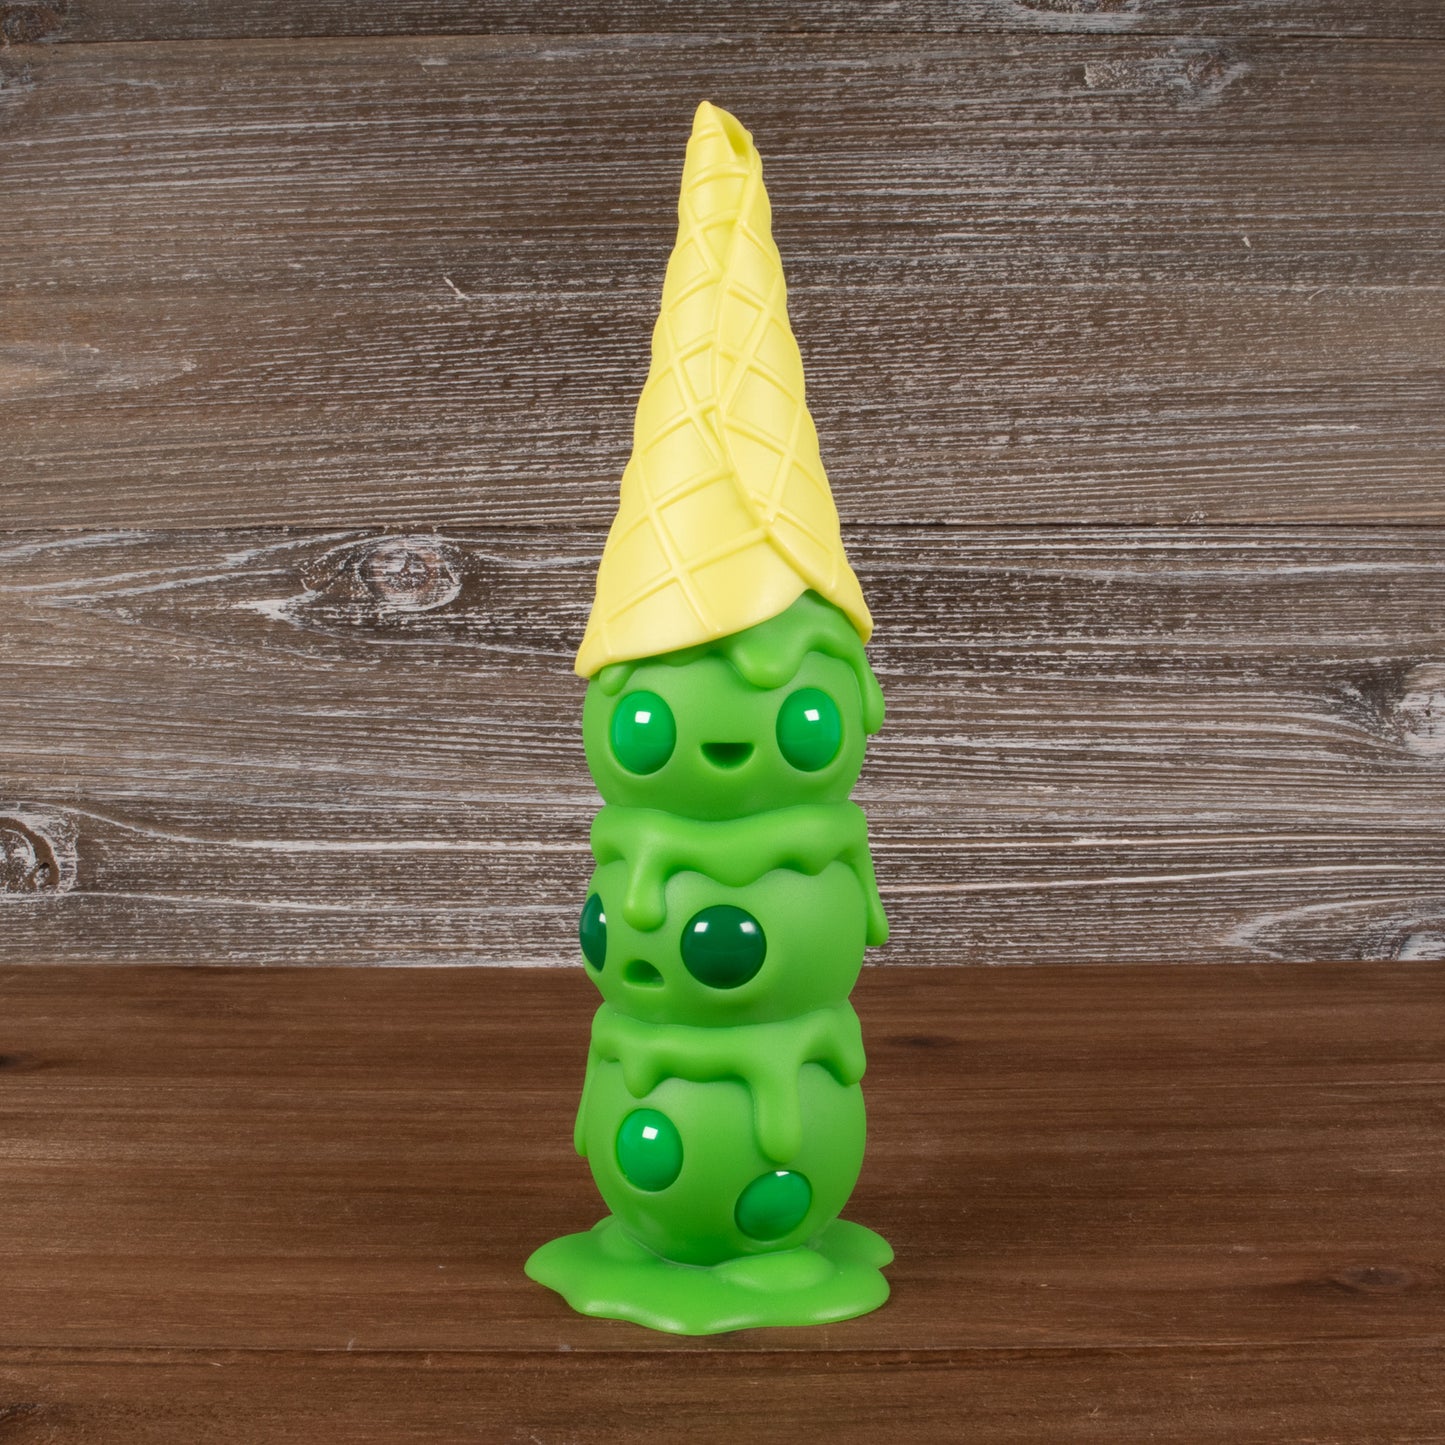 This is Wafull Big Green Envy Limited Edition Resin Figure